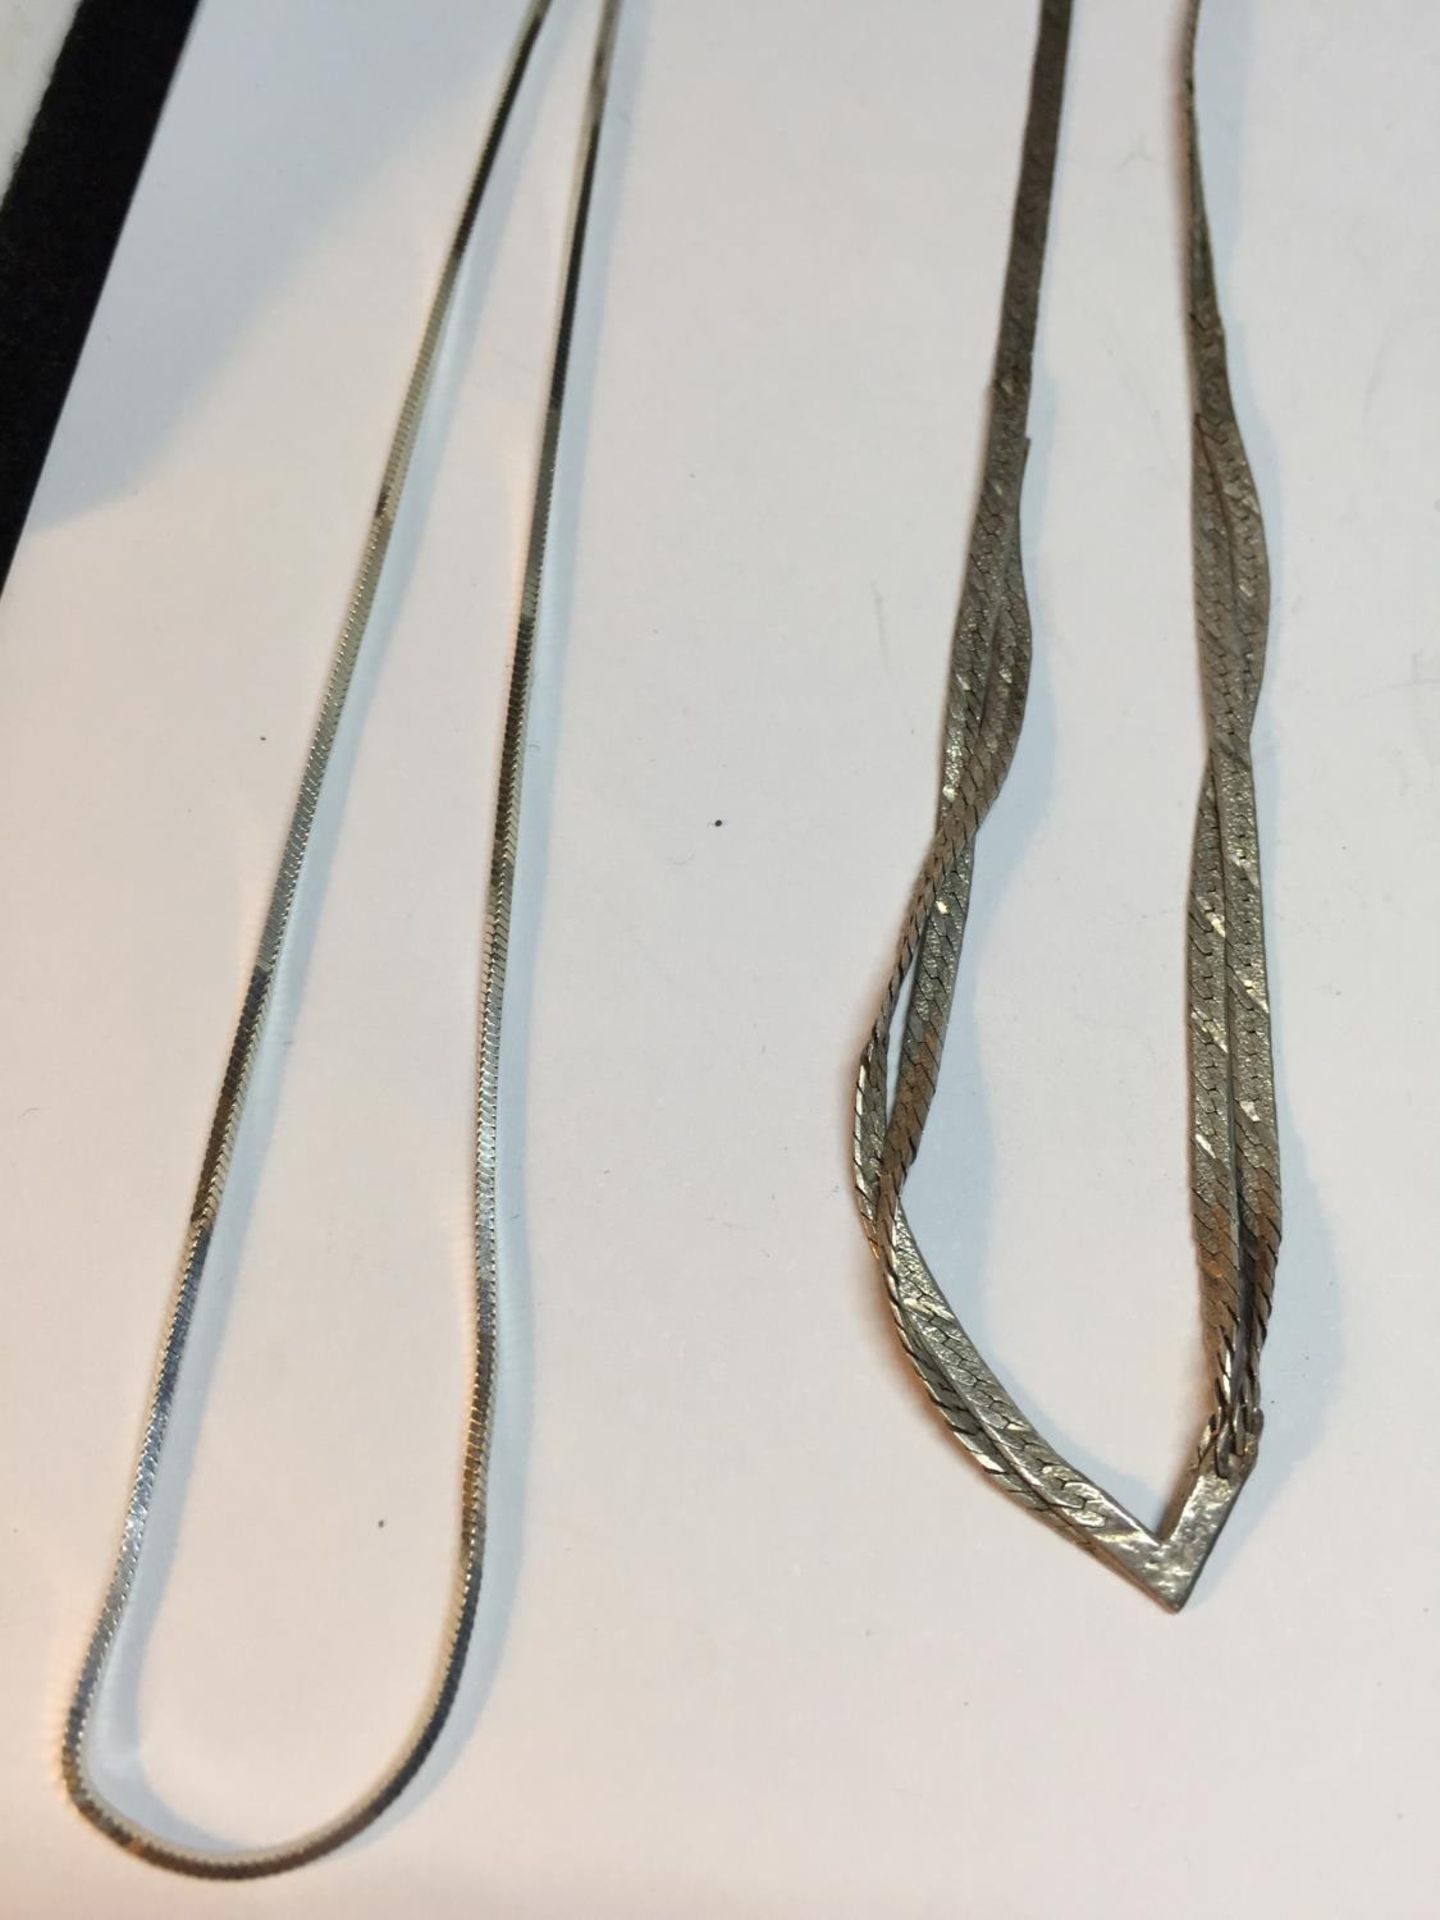 SIX SILVER NECKLACES - Image 2 of 4